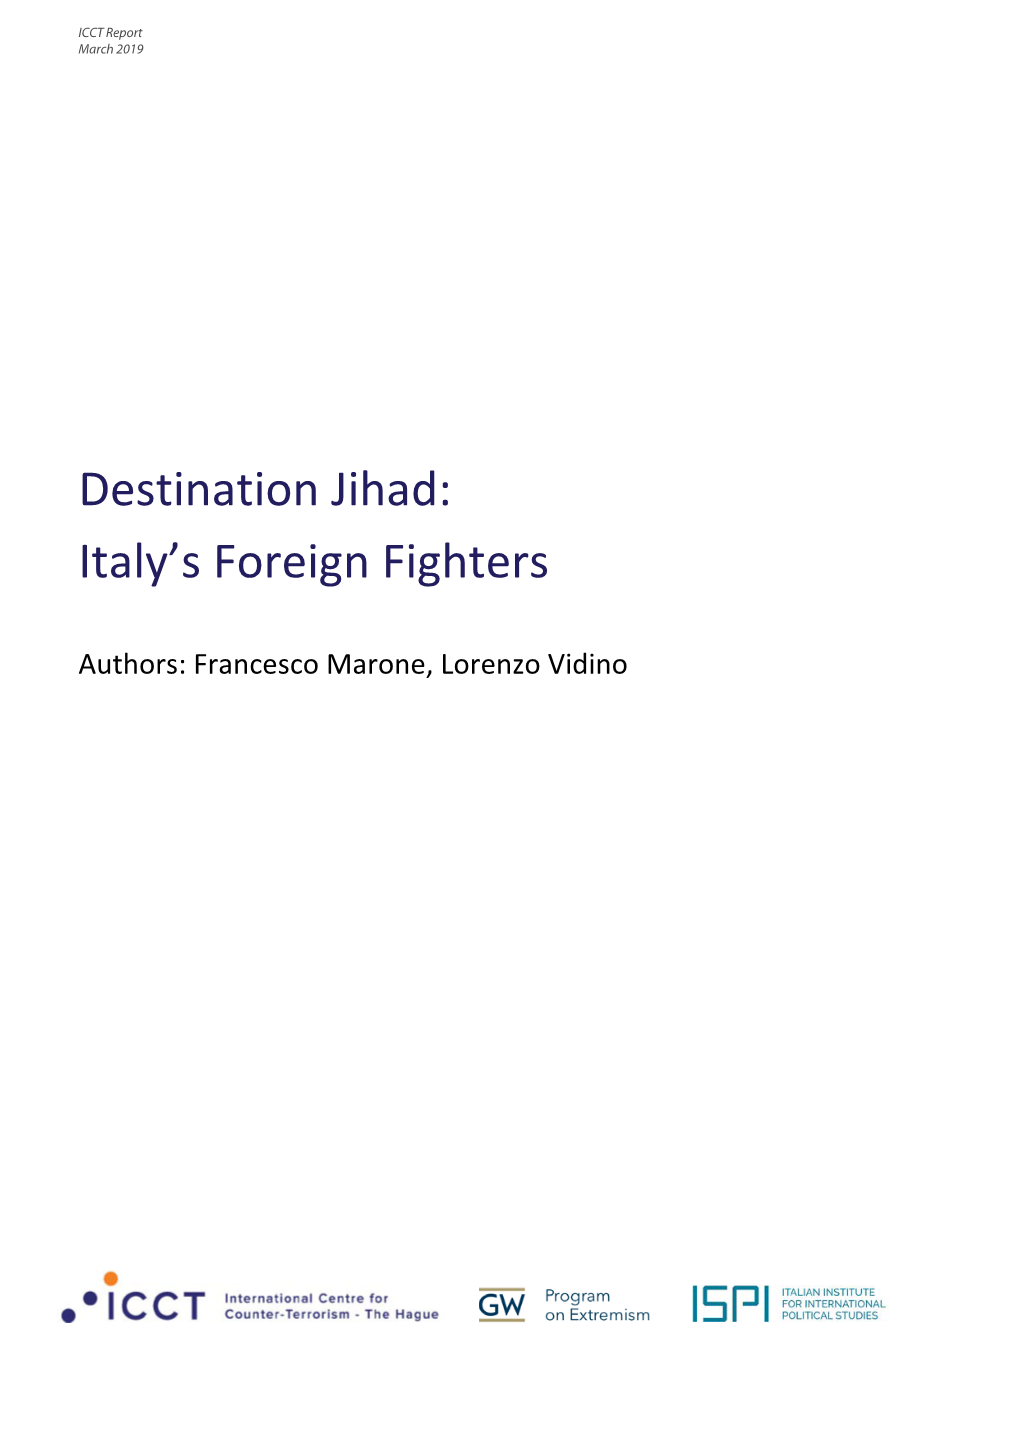 Italy's Foreign Fighters